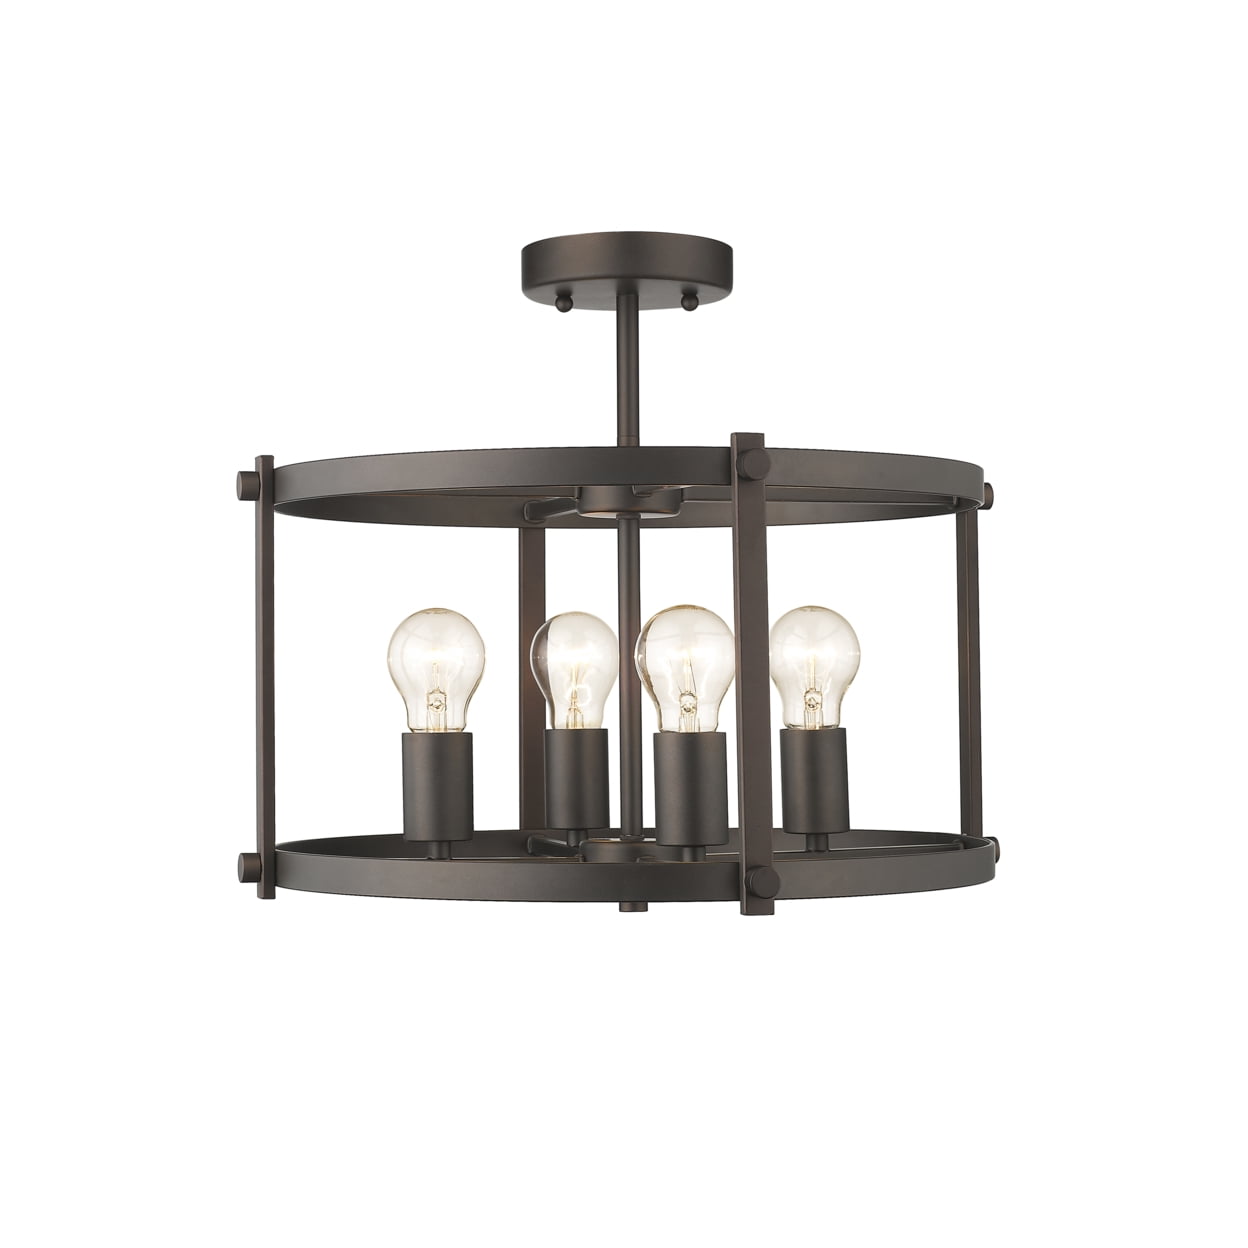 Ch2h119rb18-sf4 Ironclad Farmhouse 4 Light Rubbed Bronze Convertible Semi-flush Ceiling Fixture - 17.5 In.